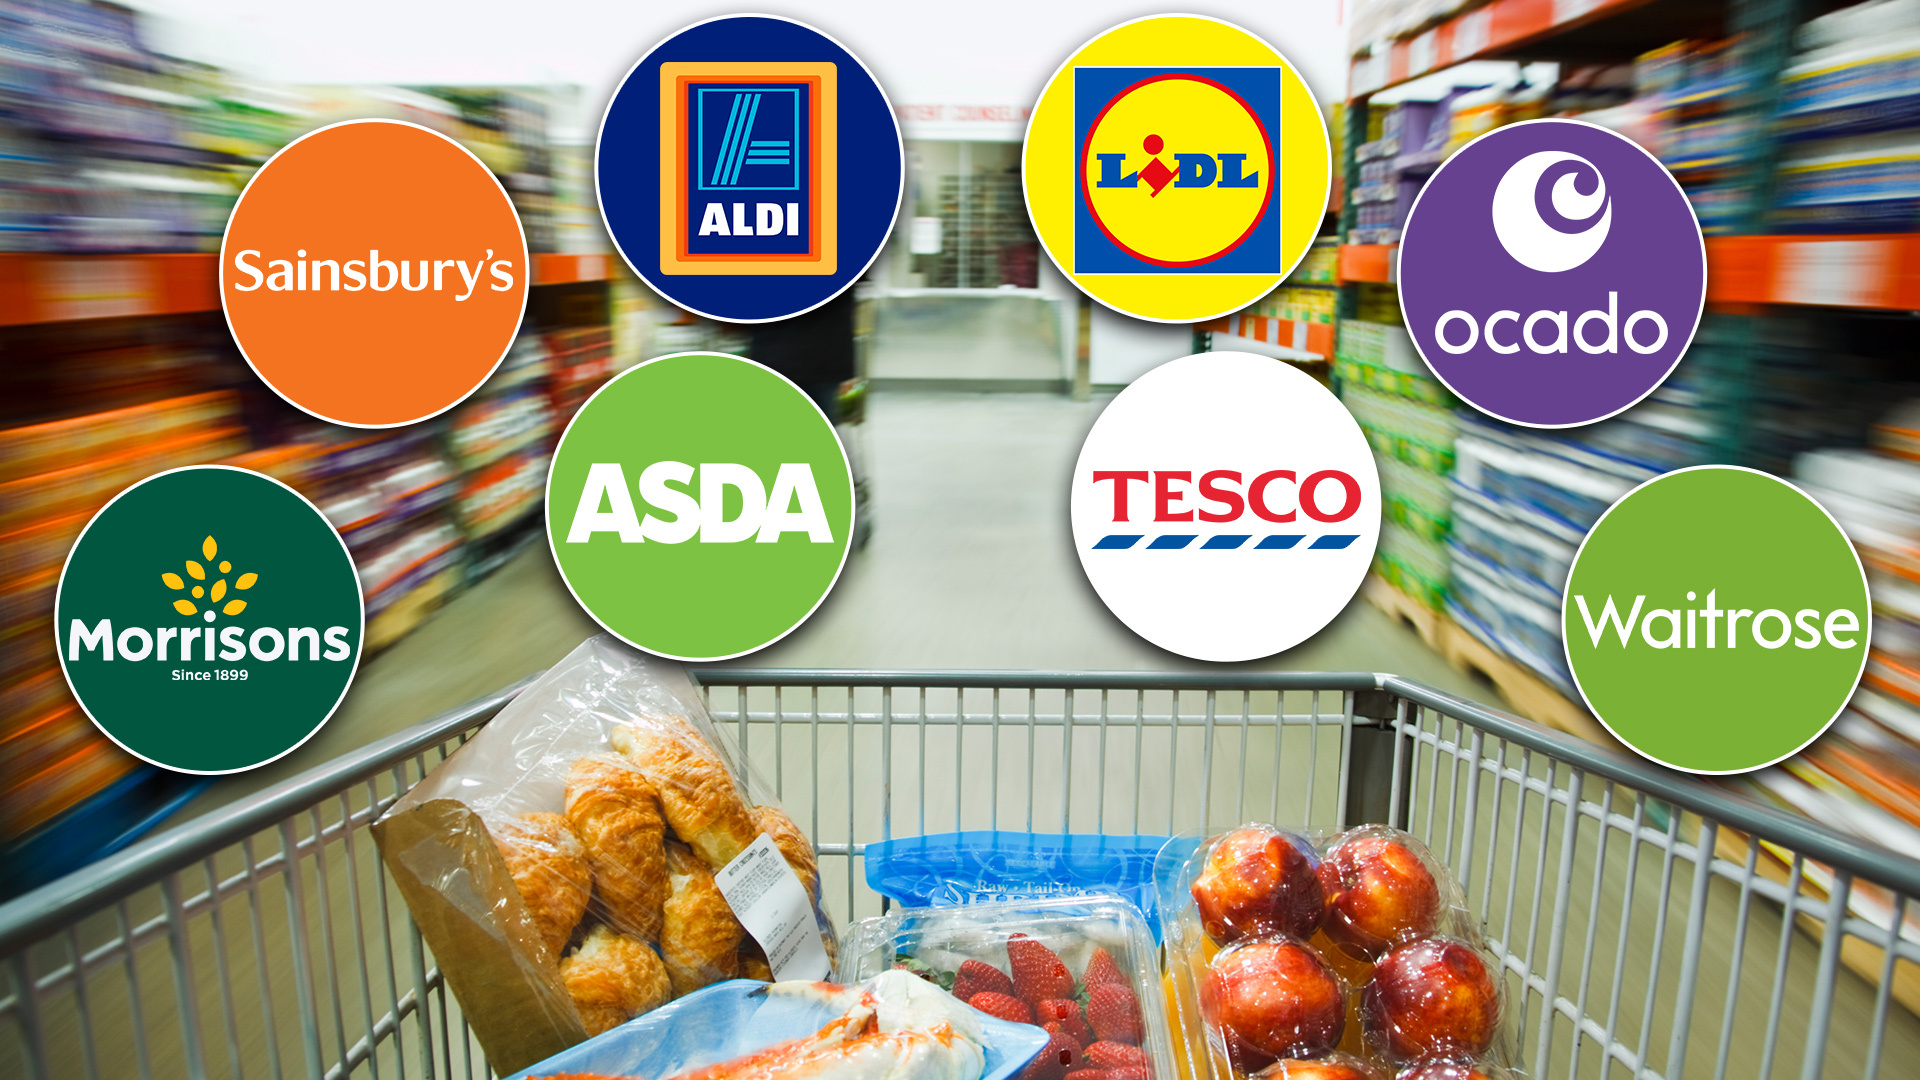 UK’s cheapest supermarket for a weekly shop in March revealed – and it’s not Lidl or Asda [Video]